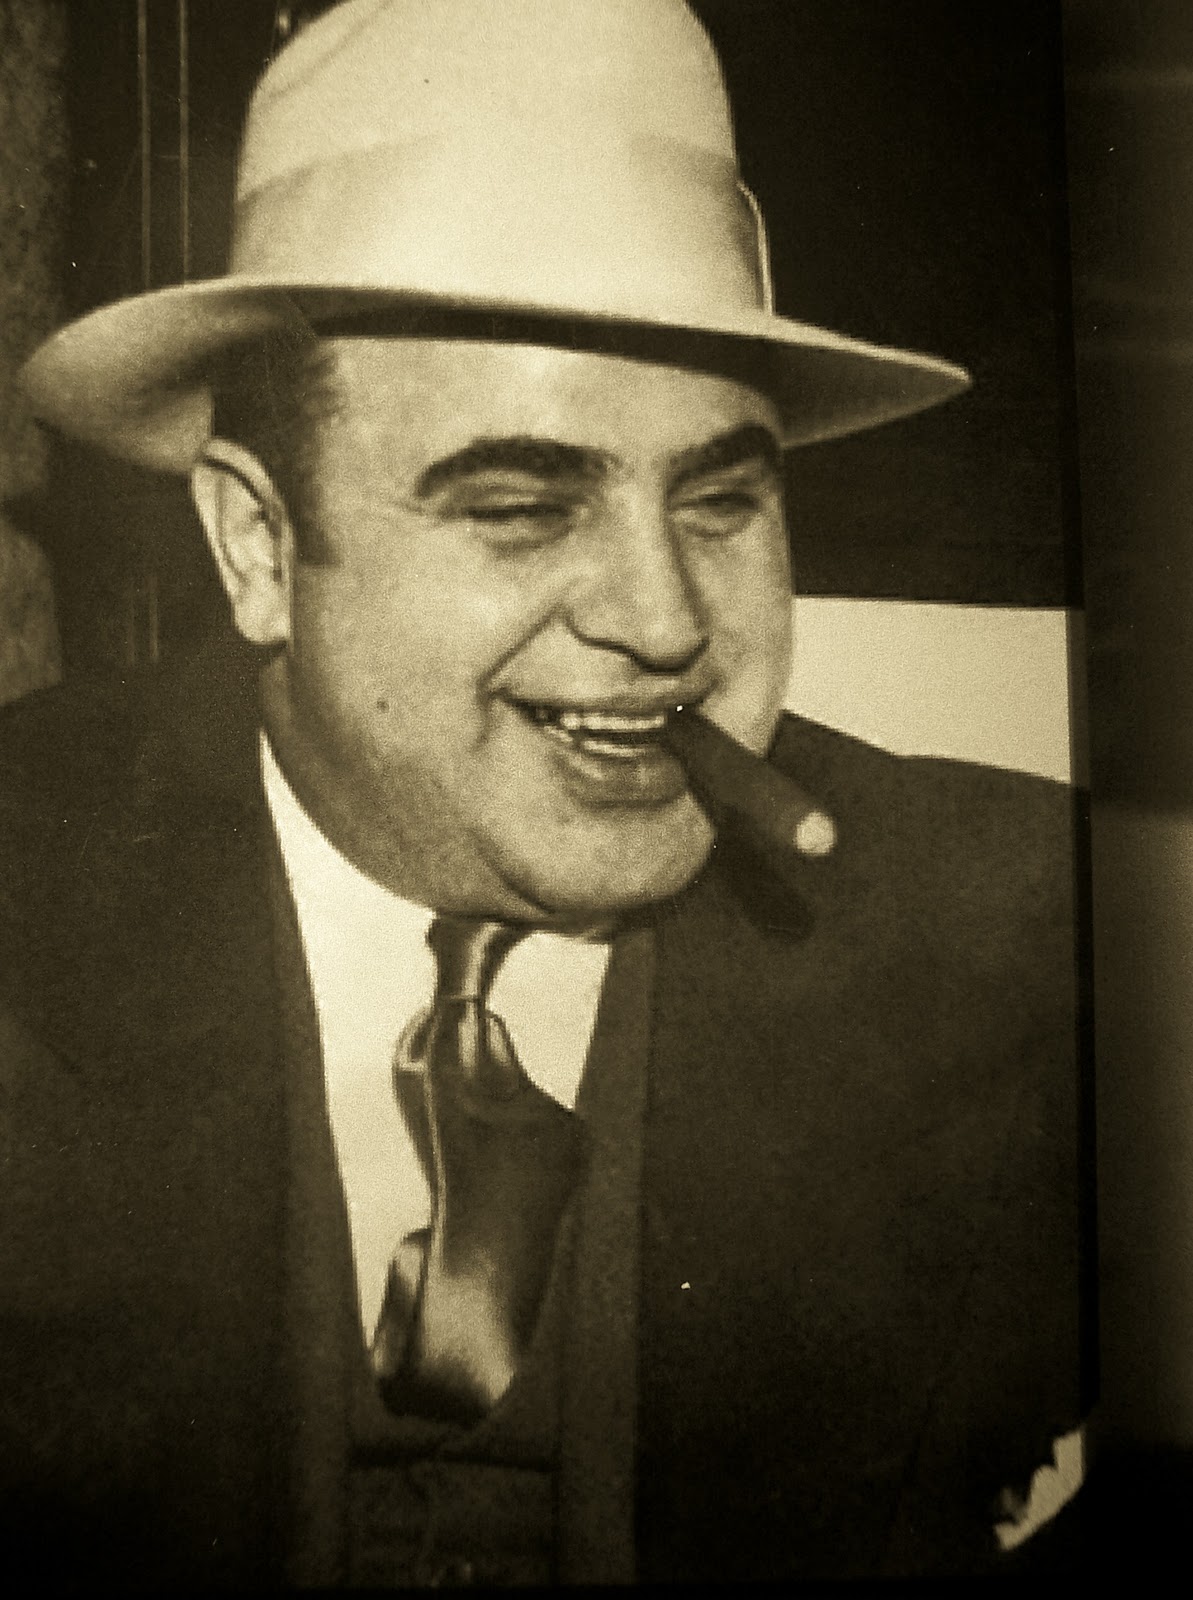 Al Capone had syphilis and it may have driven him mad. Other notable people who most likely suffered from syphilis include Hernando Cortez, Benito Mussolini, Friedrich Nietzsche, Edourd Manet and Napoleon.